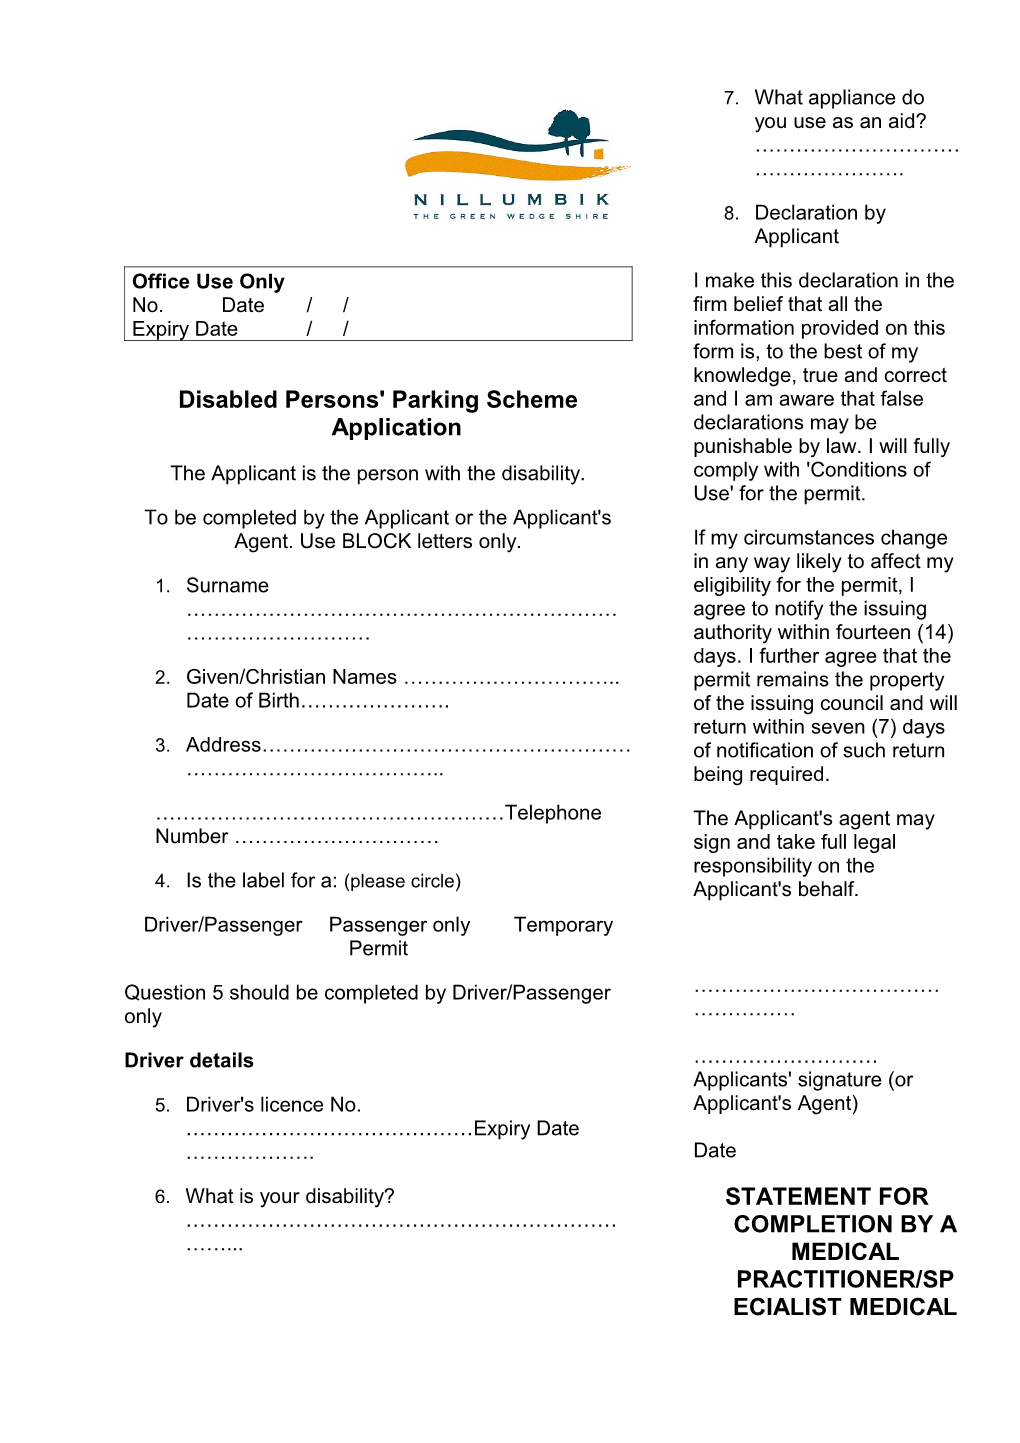 Disabled Persons' Parking Permit Application